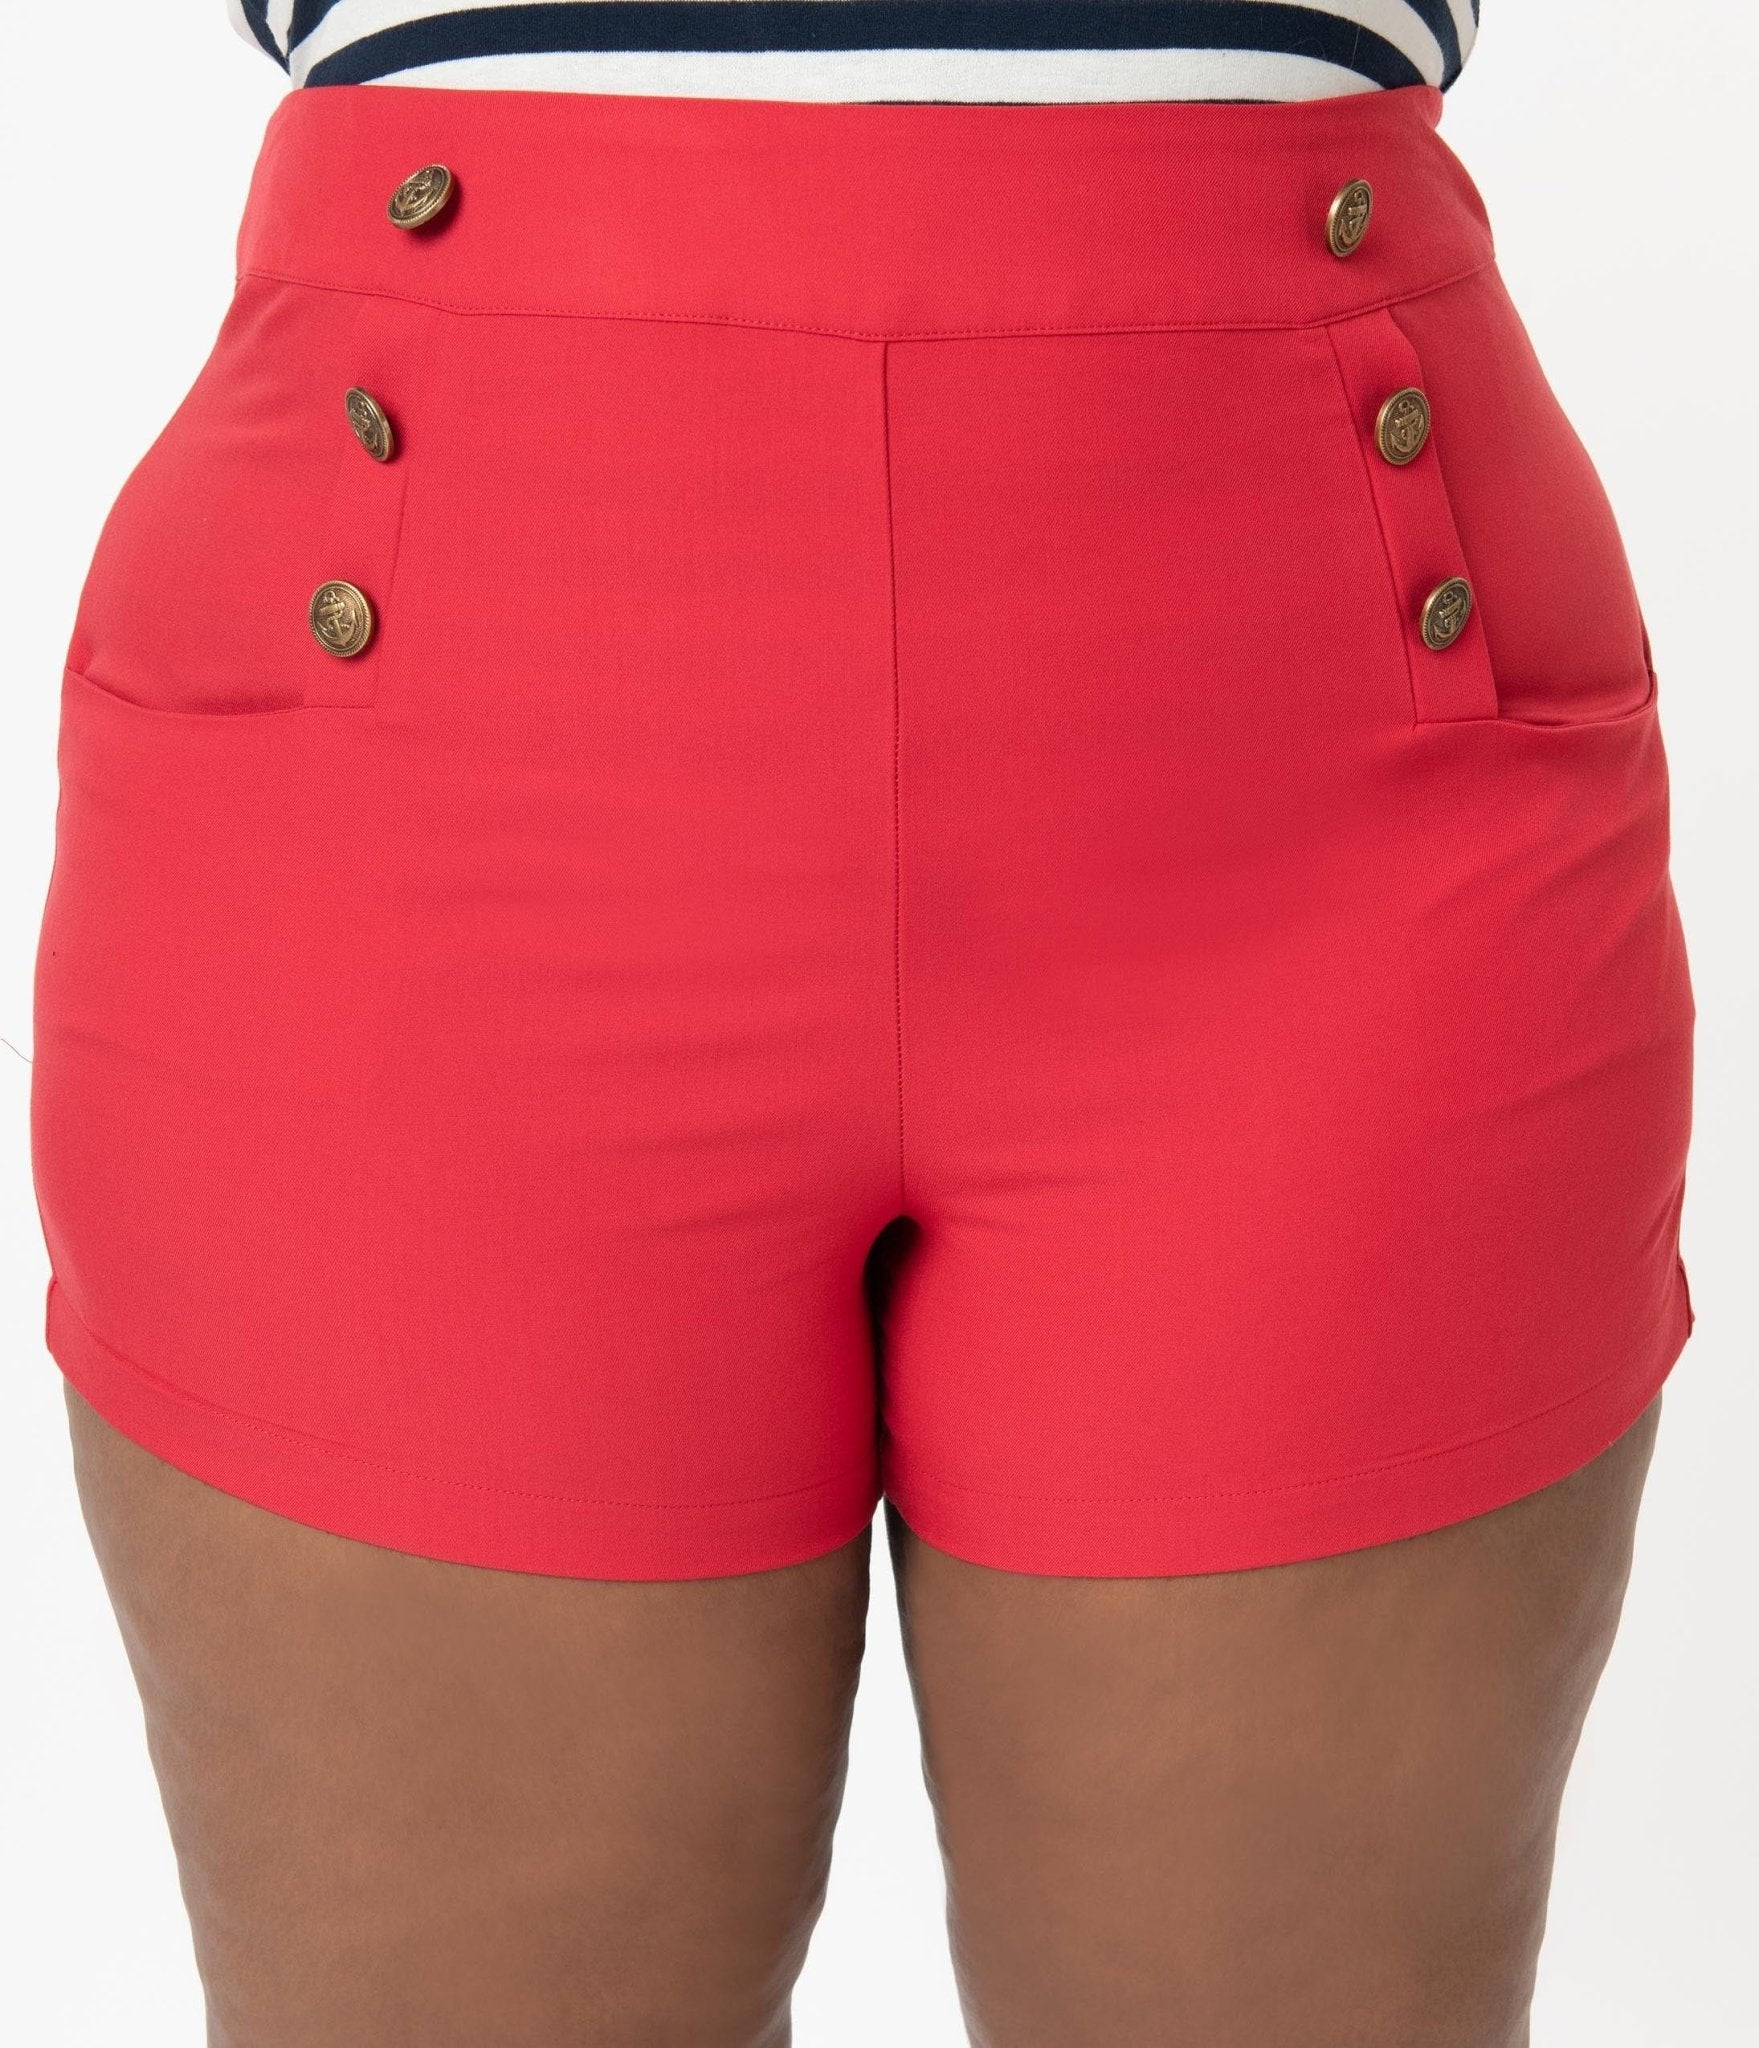 High Waisted Red Shorts  Sailor Shorts High Waisted - Inked Shop